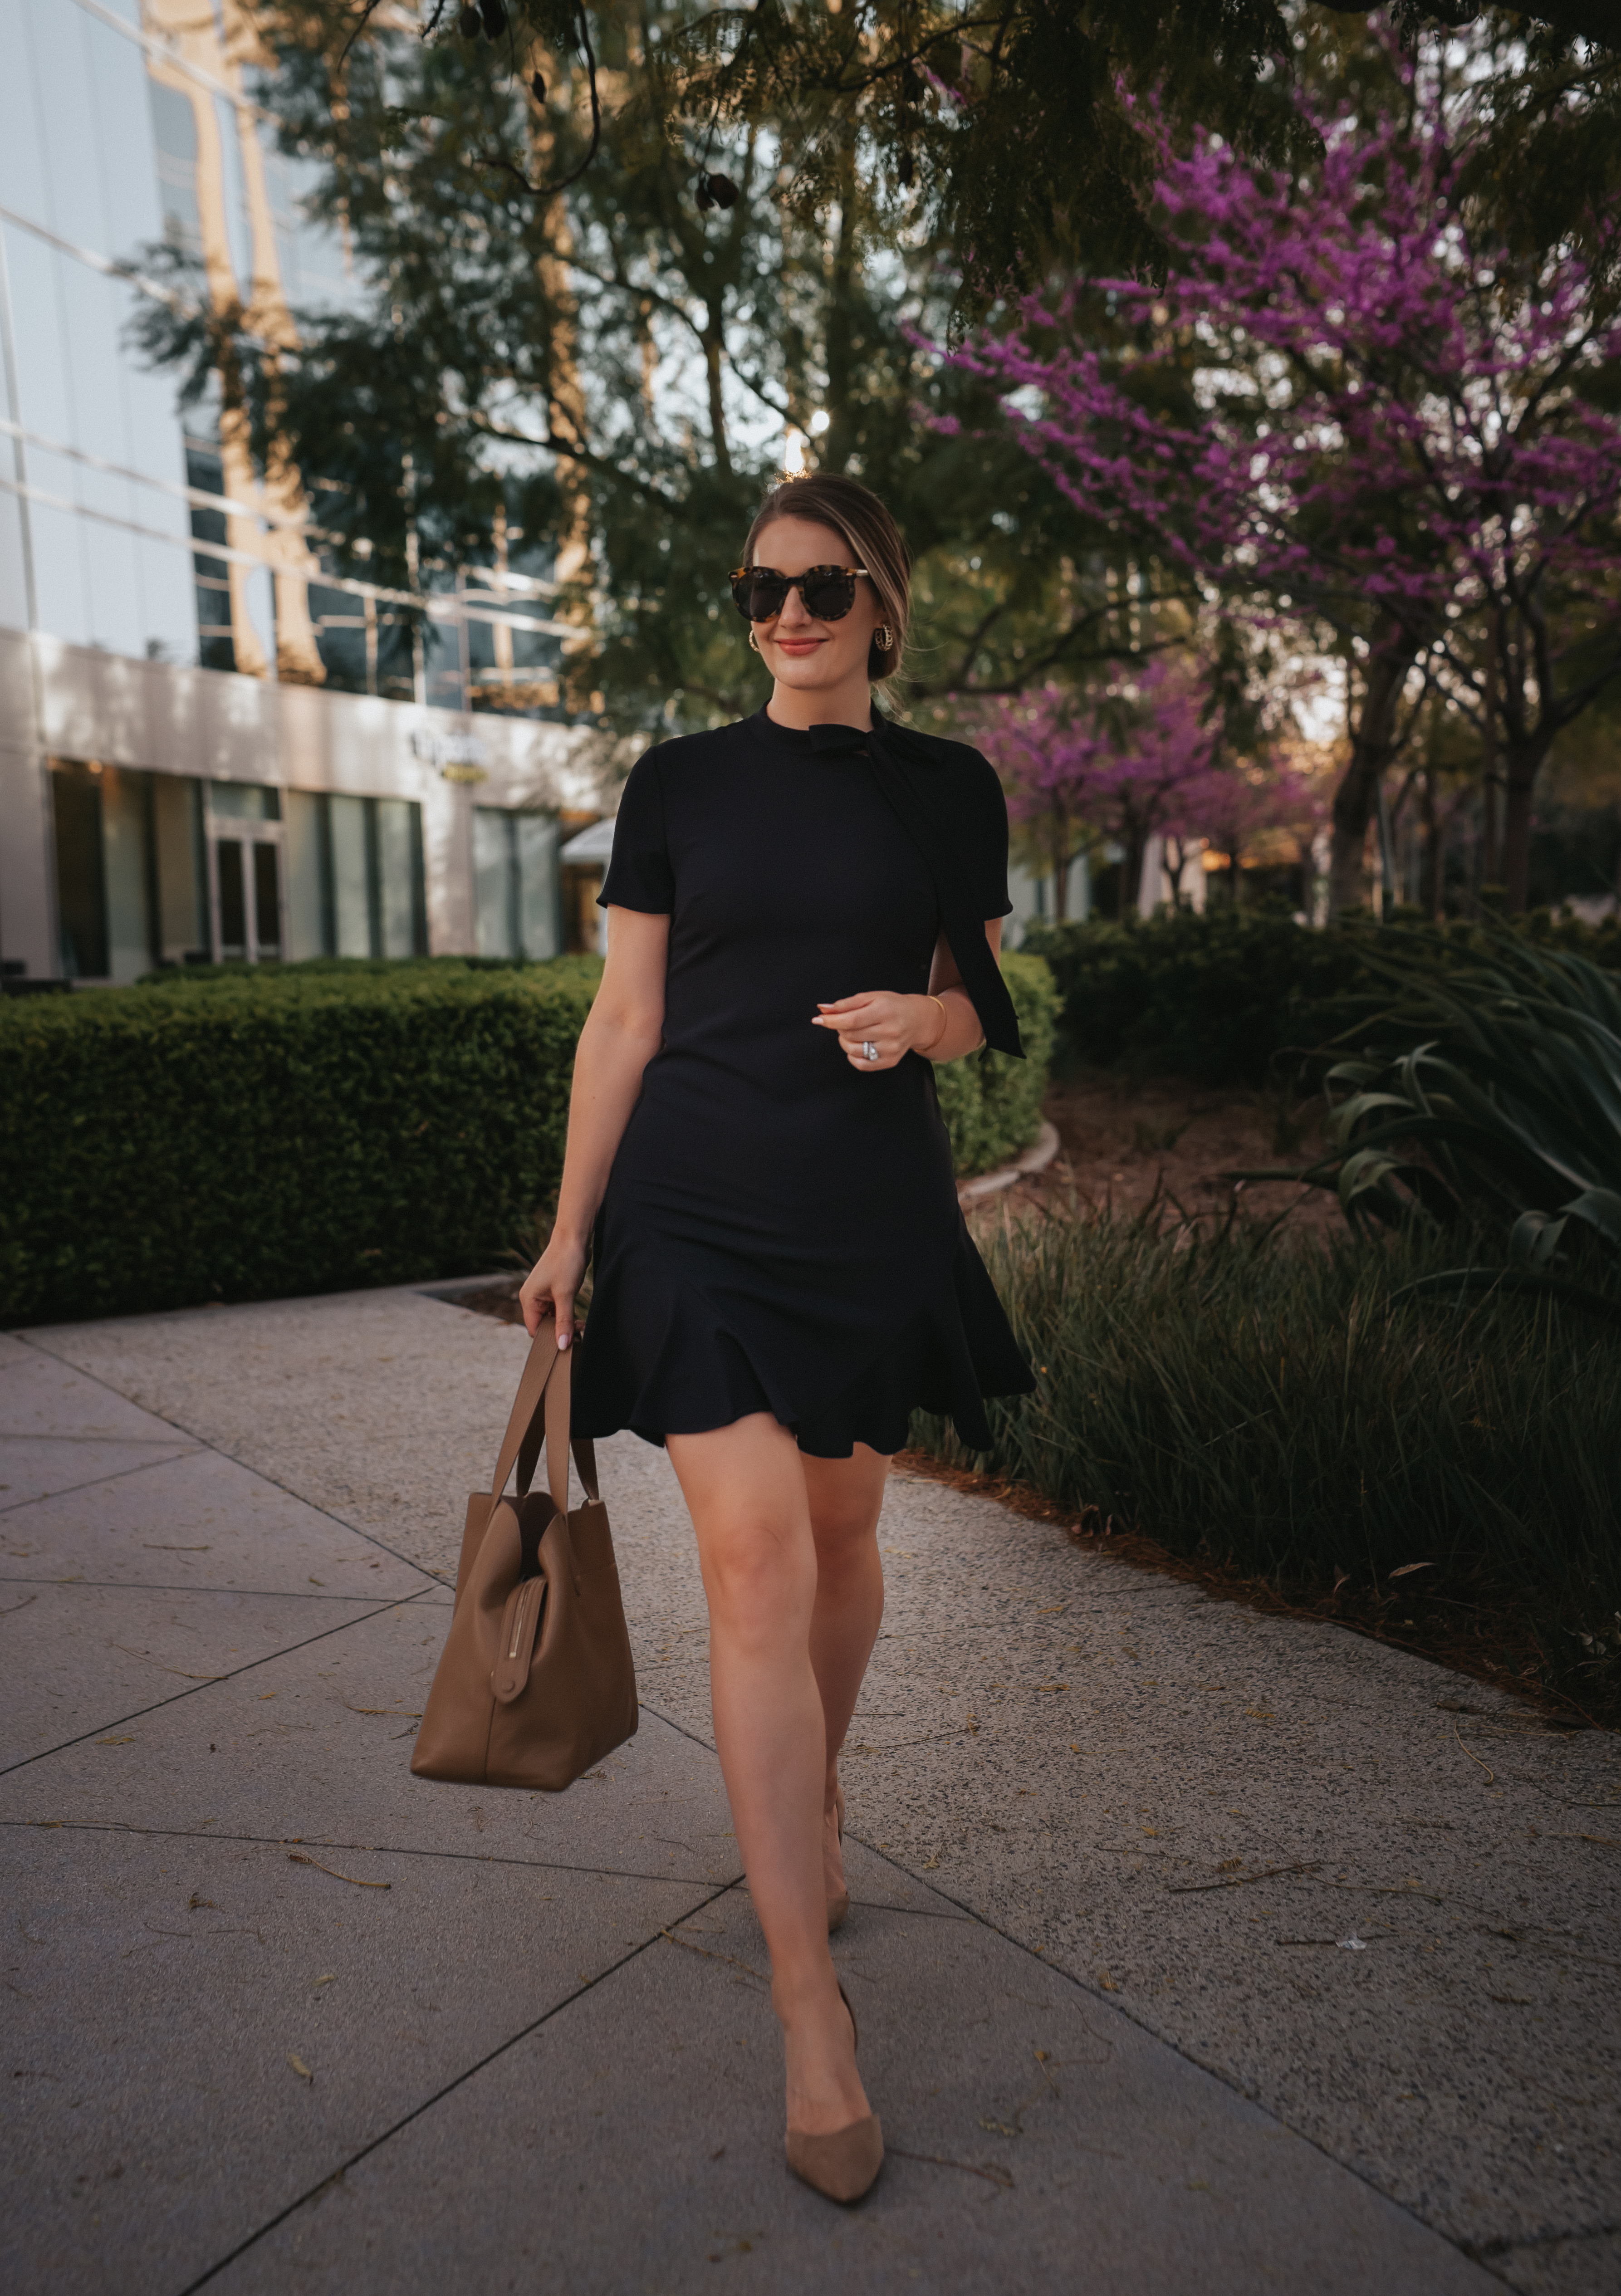 classy outfits for women in this little black dress